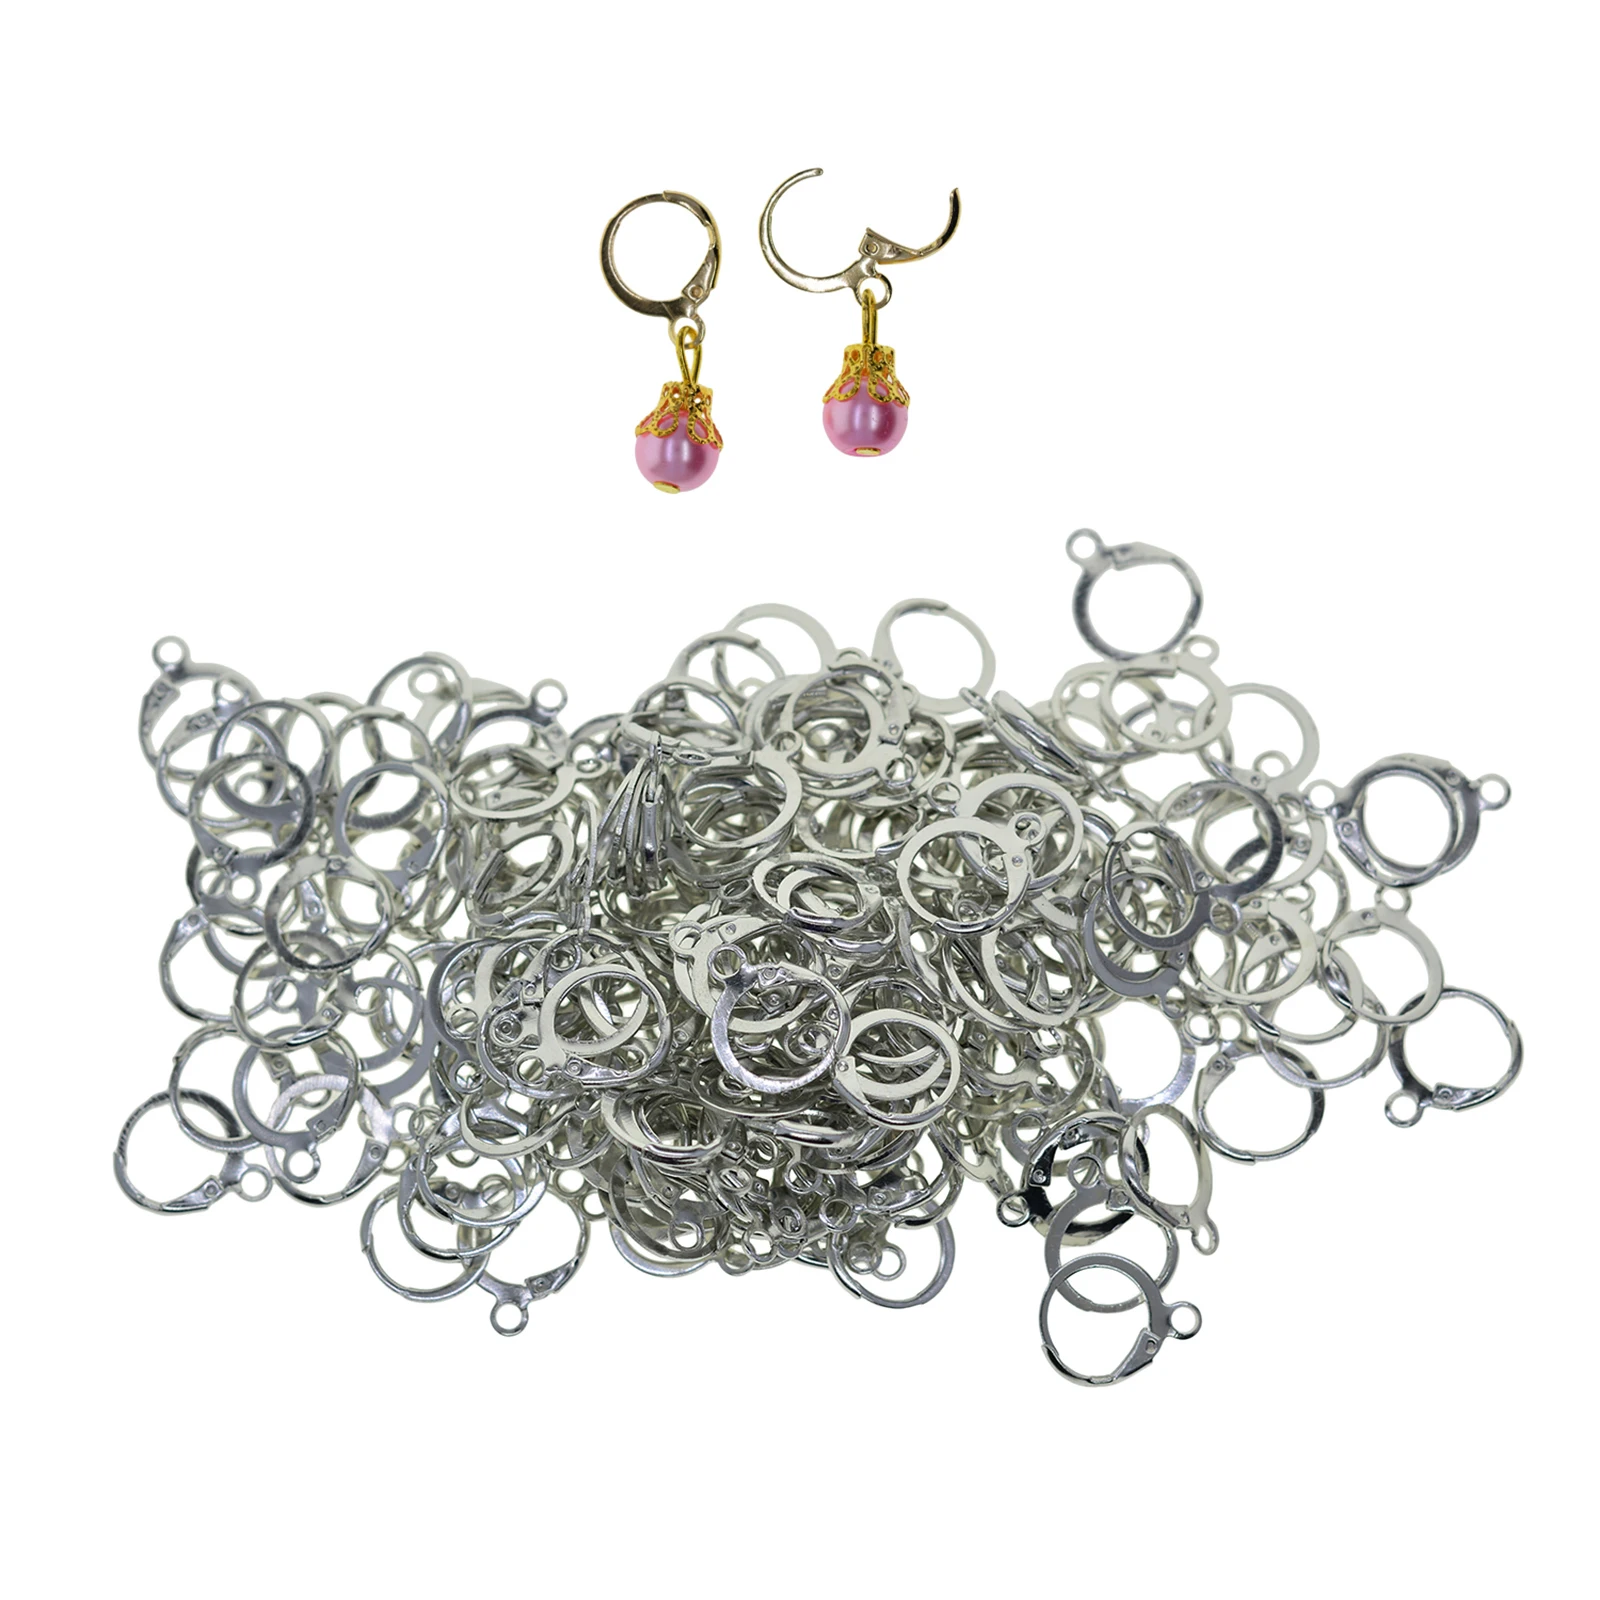 200pcs Clip On Earrings Earring Parts Jewelry Making Findings Accessories 